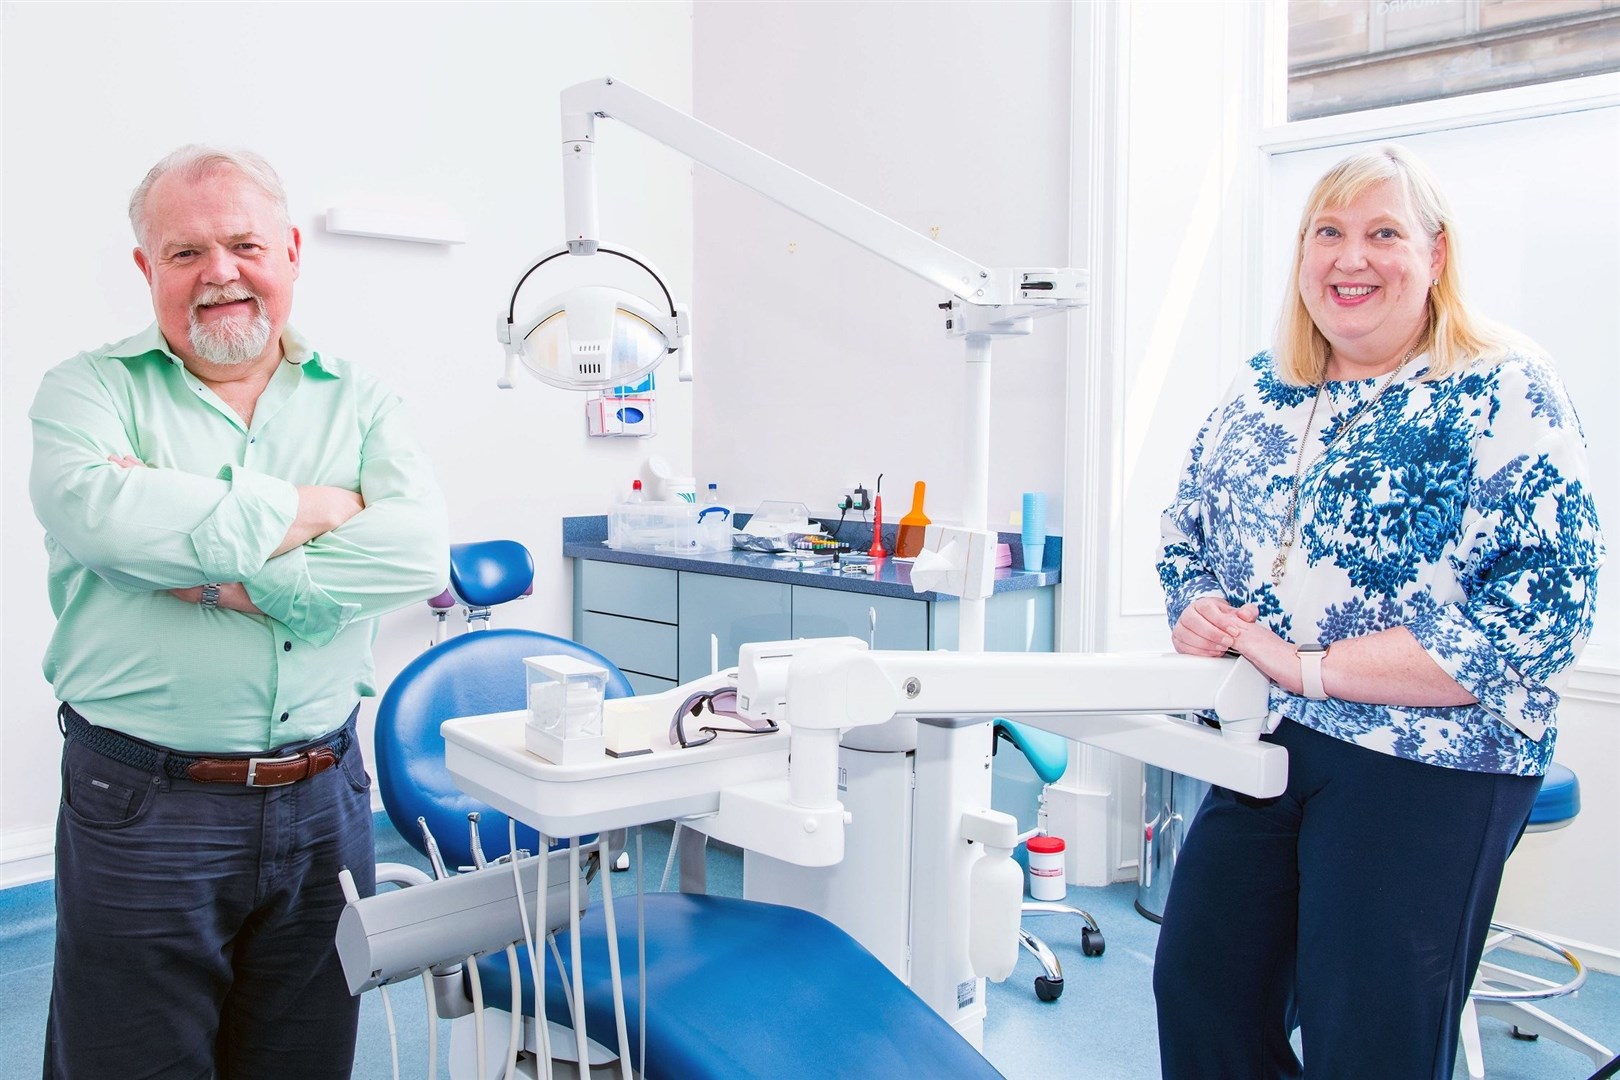 Clyde Munro Dental Group, CEO and Founder, Jim Hall and Jacqui Frederick